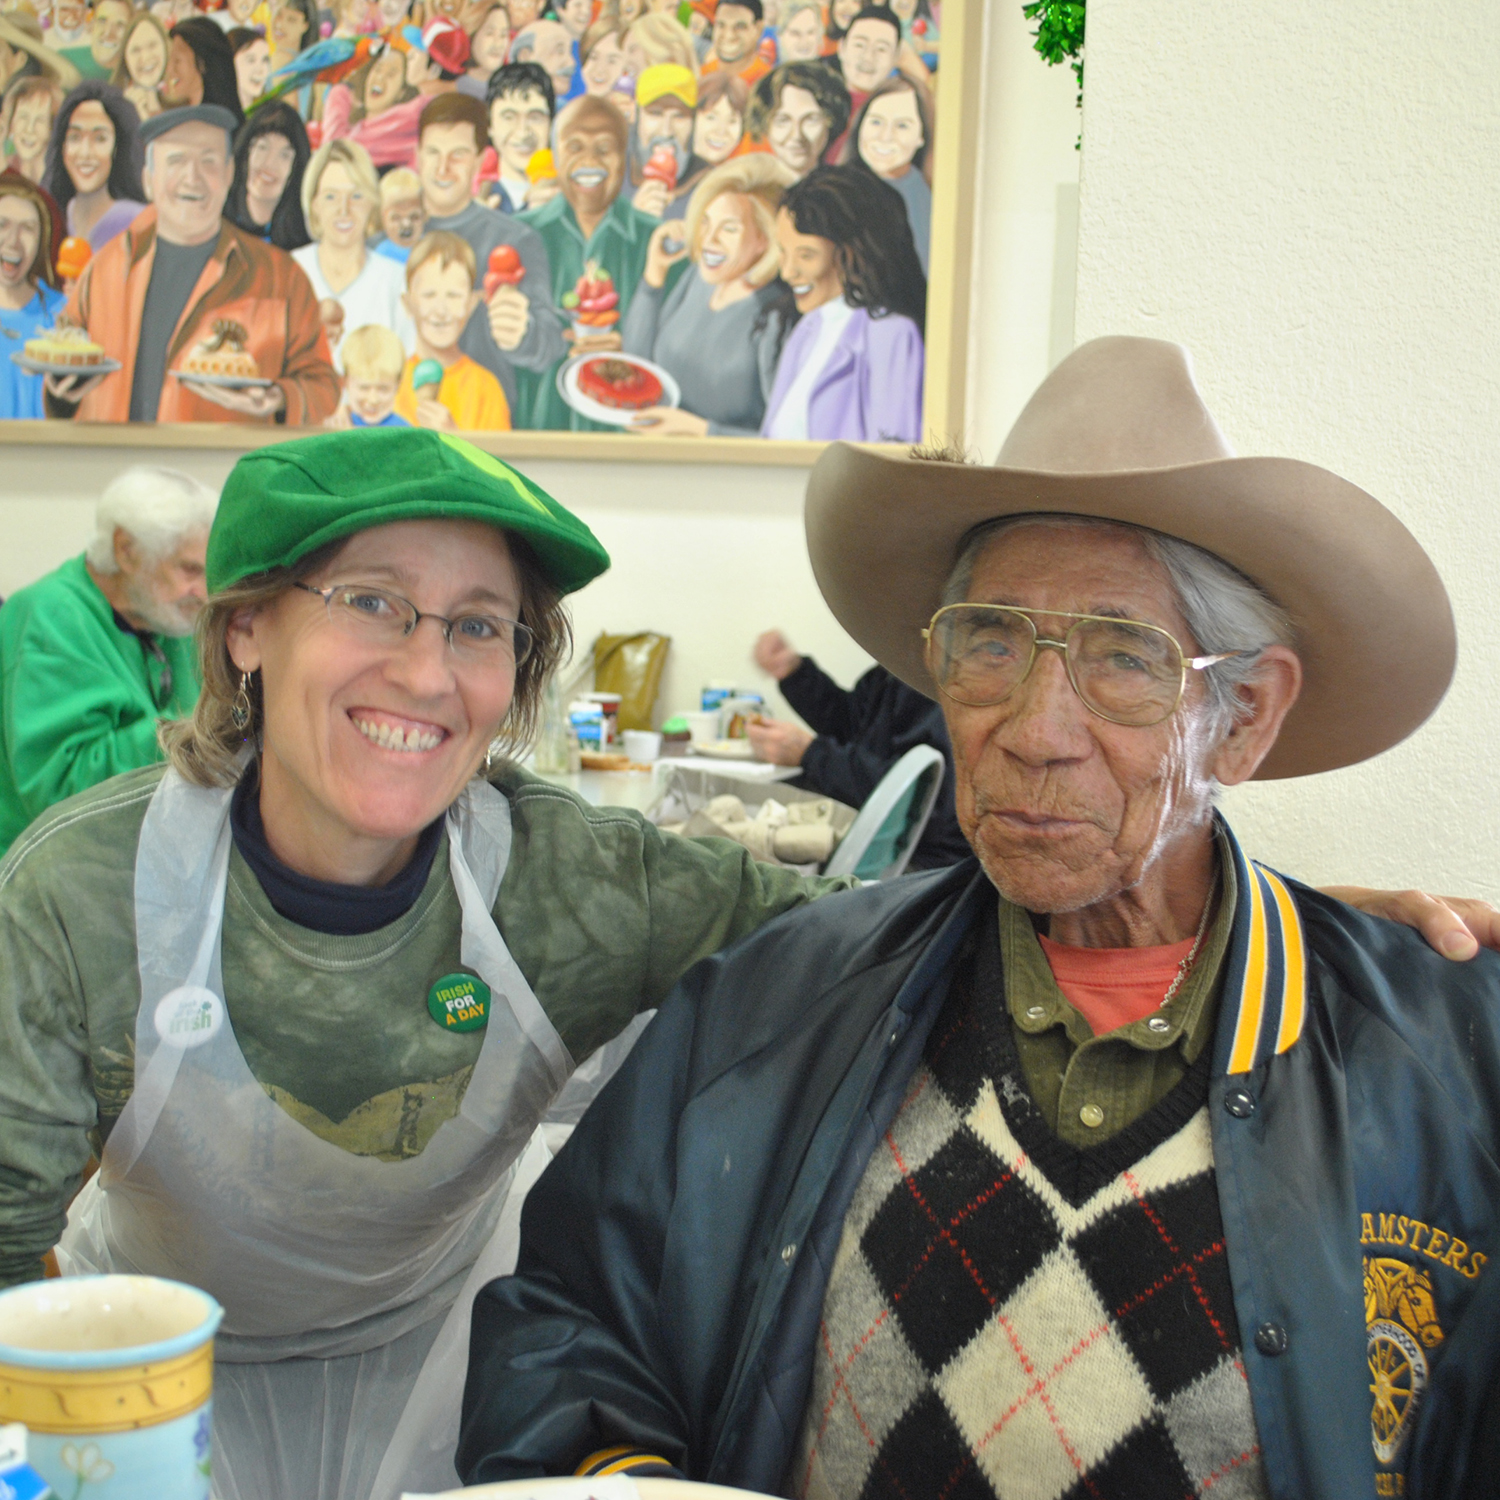 A volunteer server and a guest pose together at a free lunch for seniors put on by Community Bridges in Santa Cruz, CA